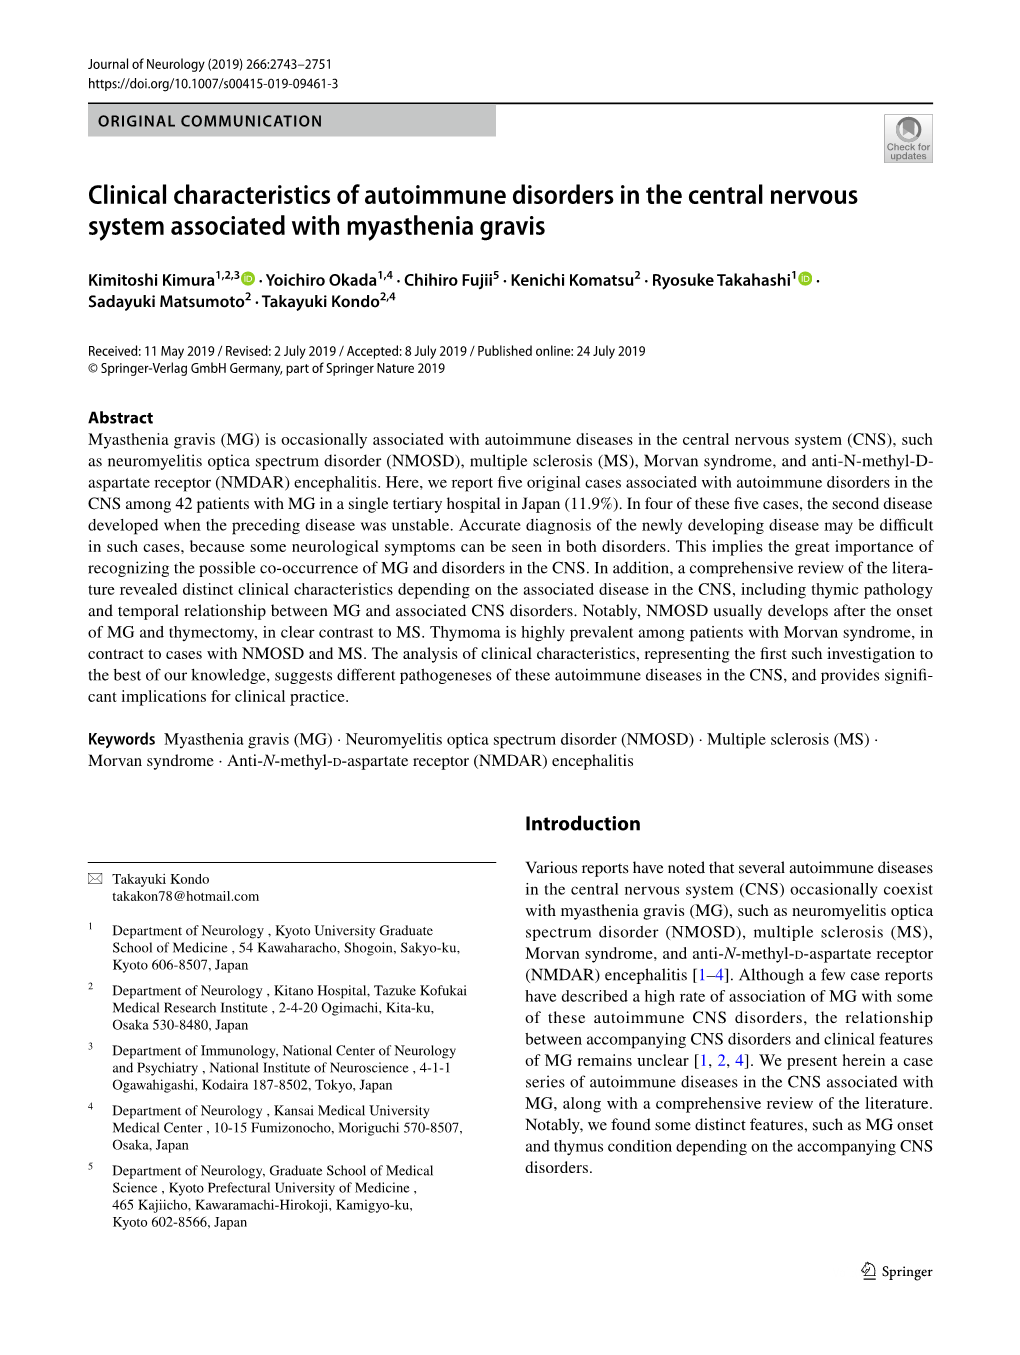 Clinical Characteristics of Autoimmune Disorders in the Central Nervous System Associated with Myasthenia Gravis